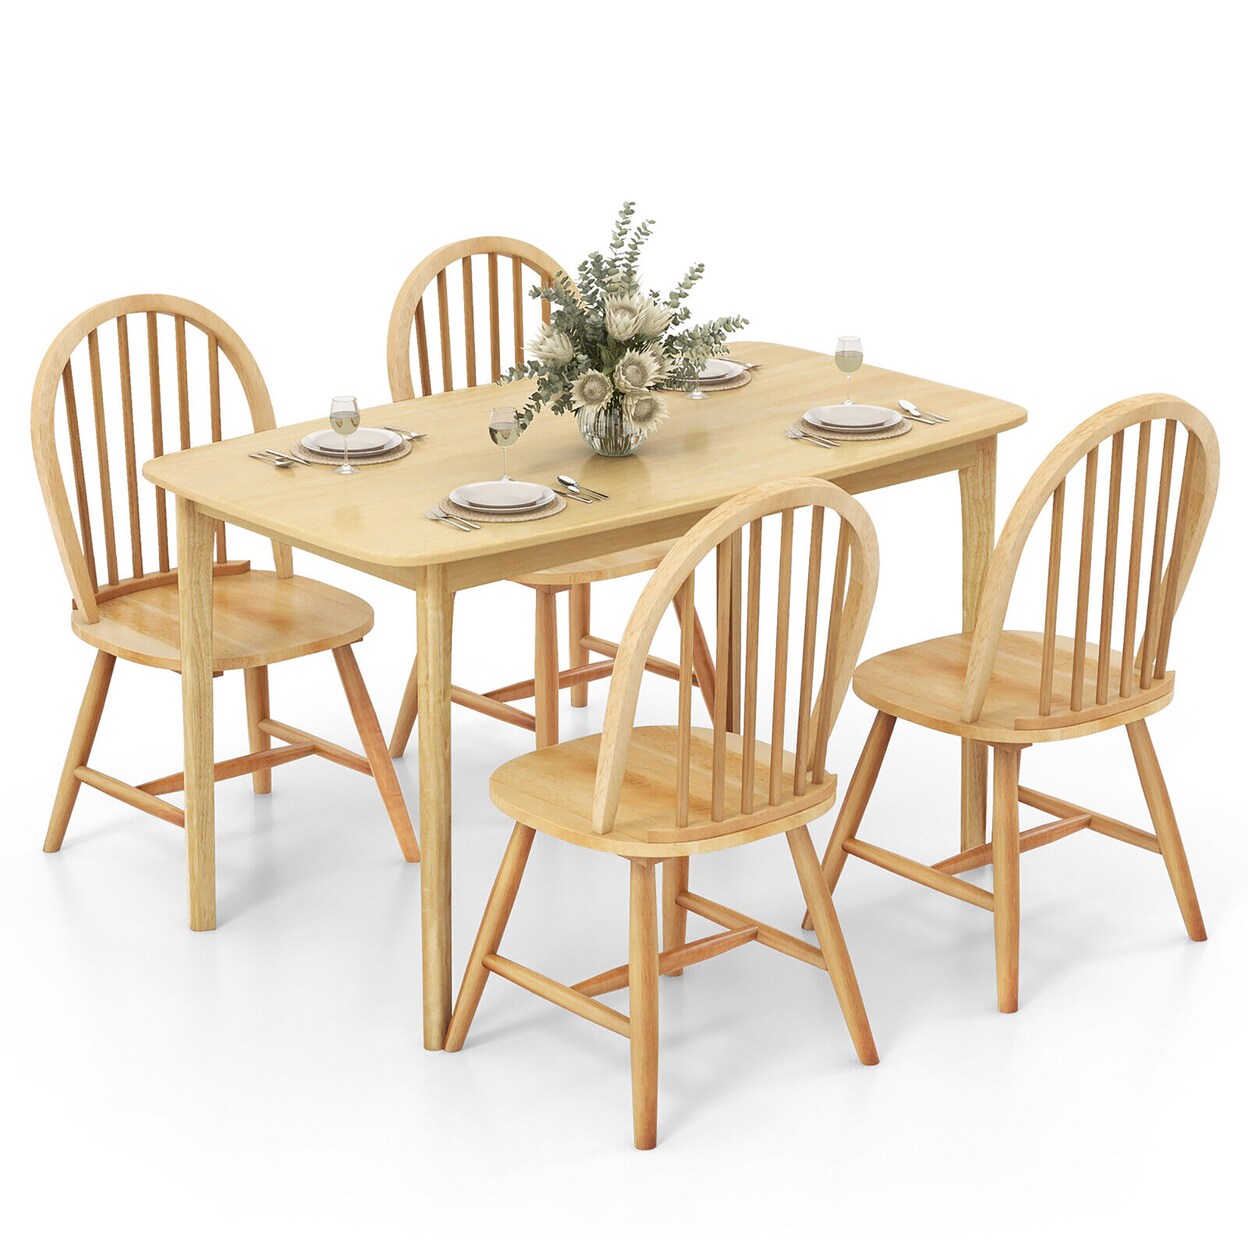 Gymax 5 PCS Wooden Dining Table Set 48 Rectangular Kitchen Table and 4 Windsor Chairs